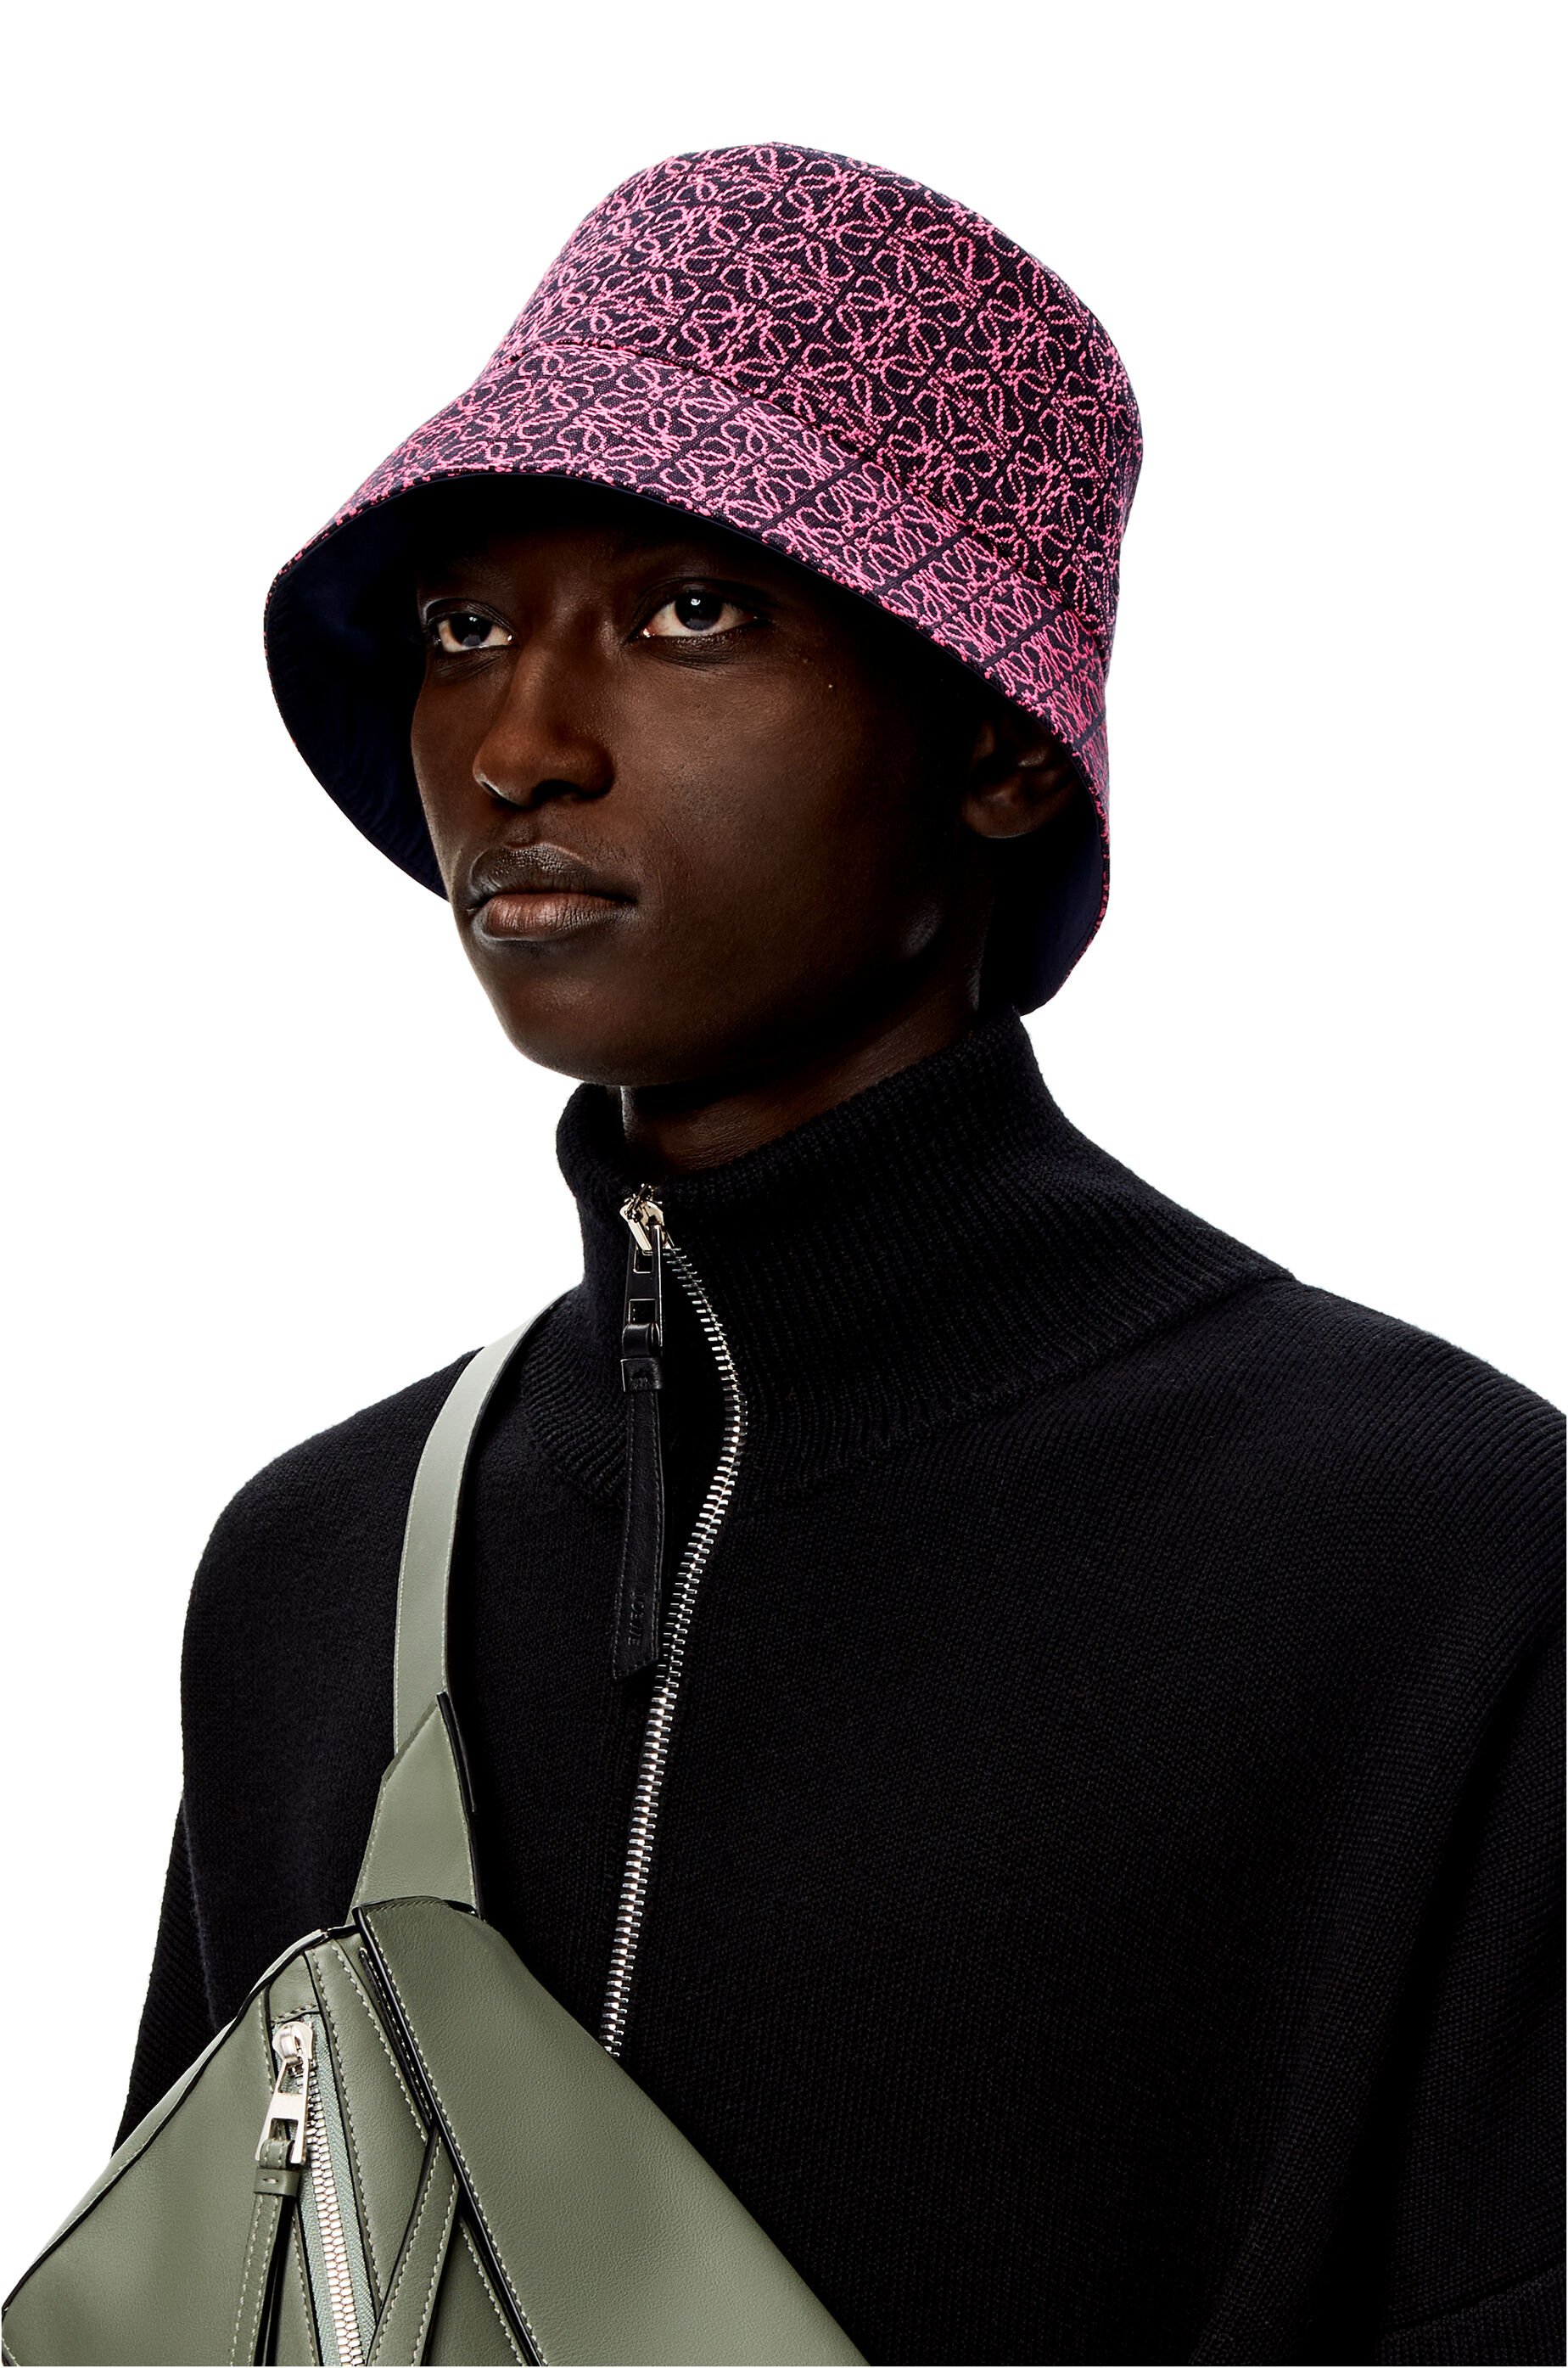 Reversible Anagram bucket hat in jacquard and nylon